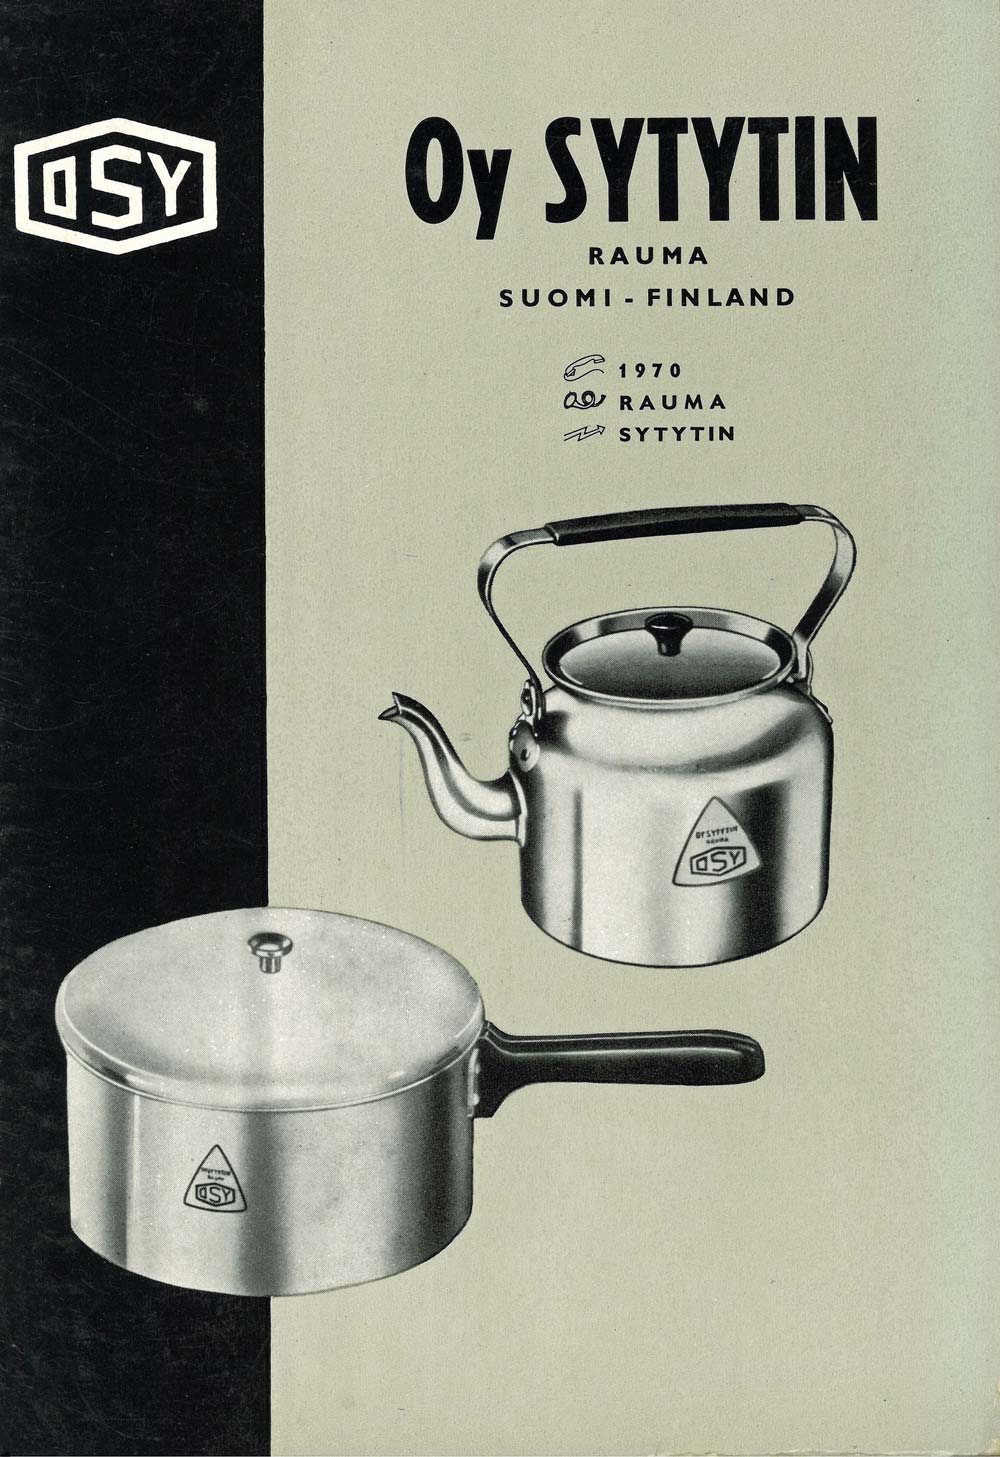 Catalogue of aluminium containers manufactured by Oy Sytytin, 1950s.